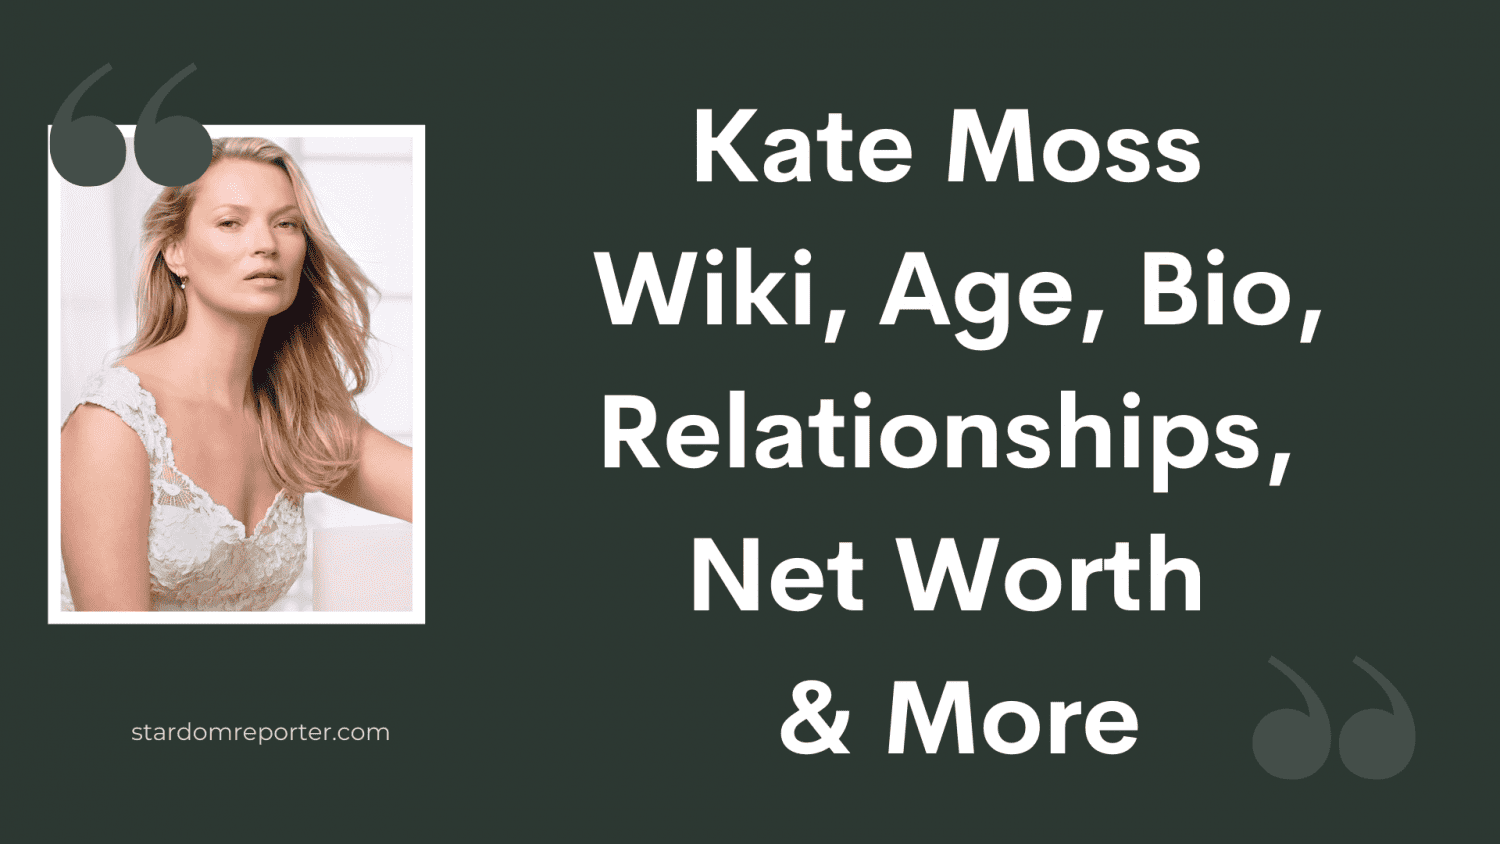 Kate Moss Wiki, Age, Bio, Relationships, Net Worth & More - 29